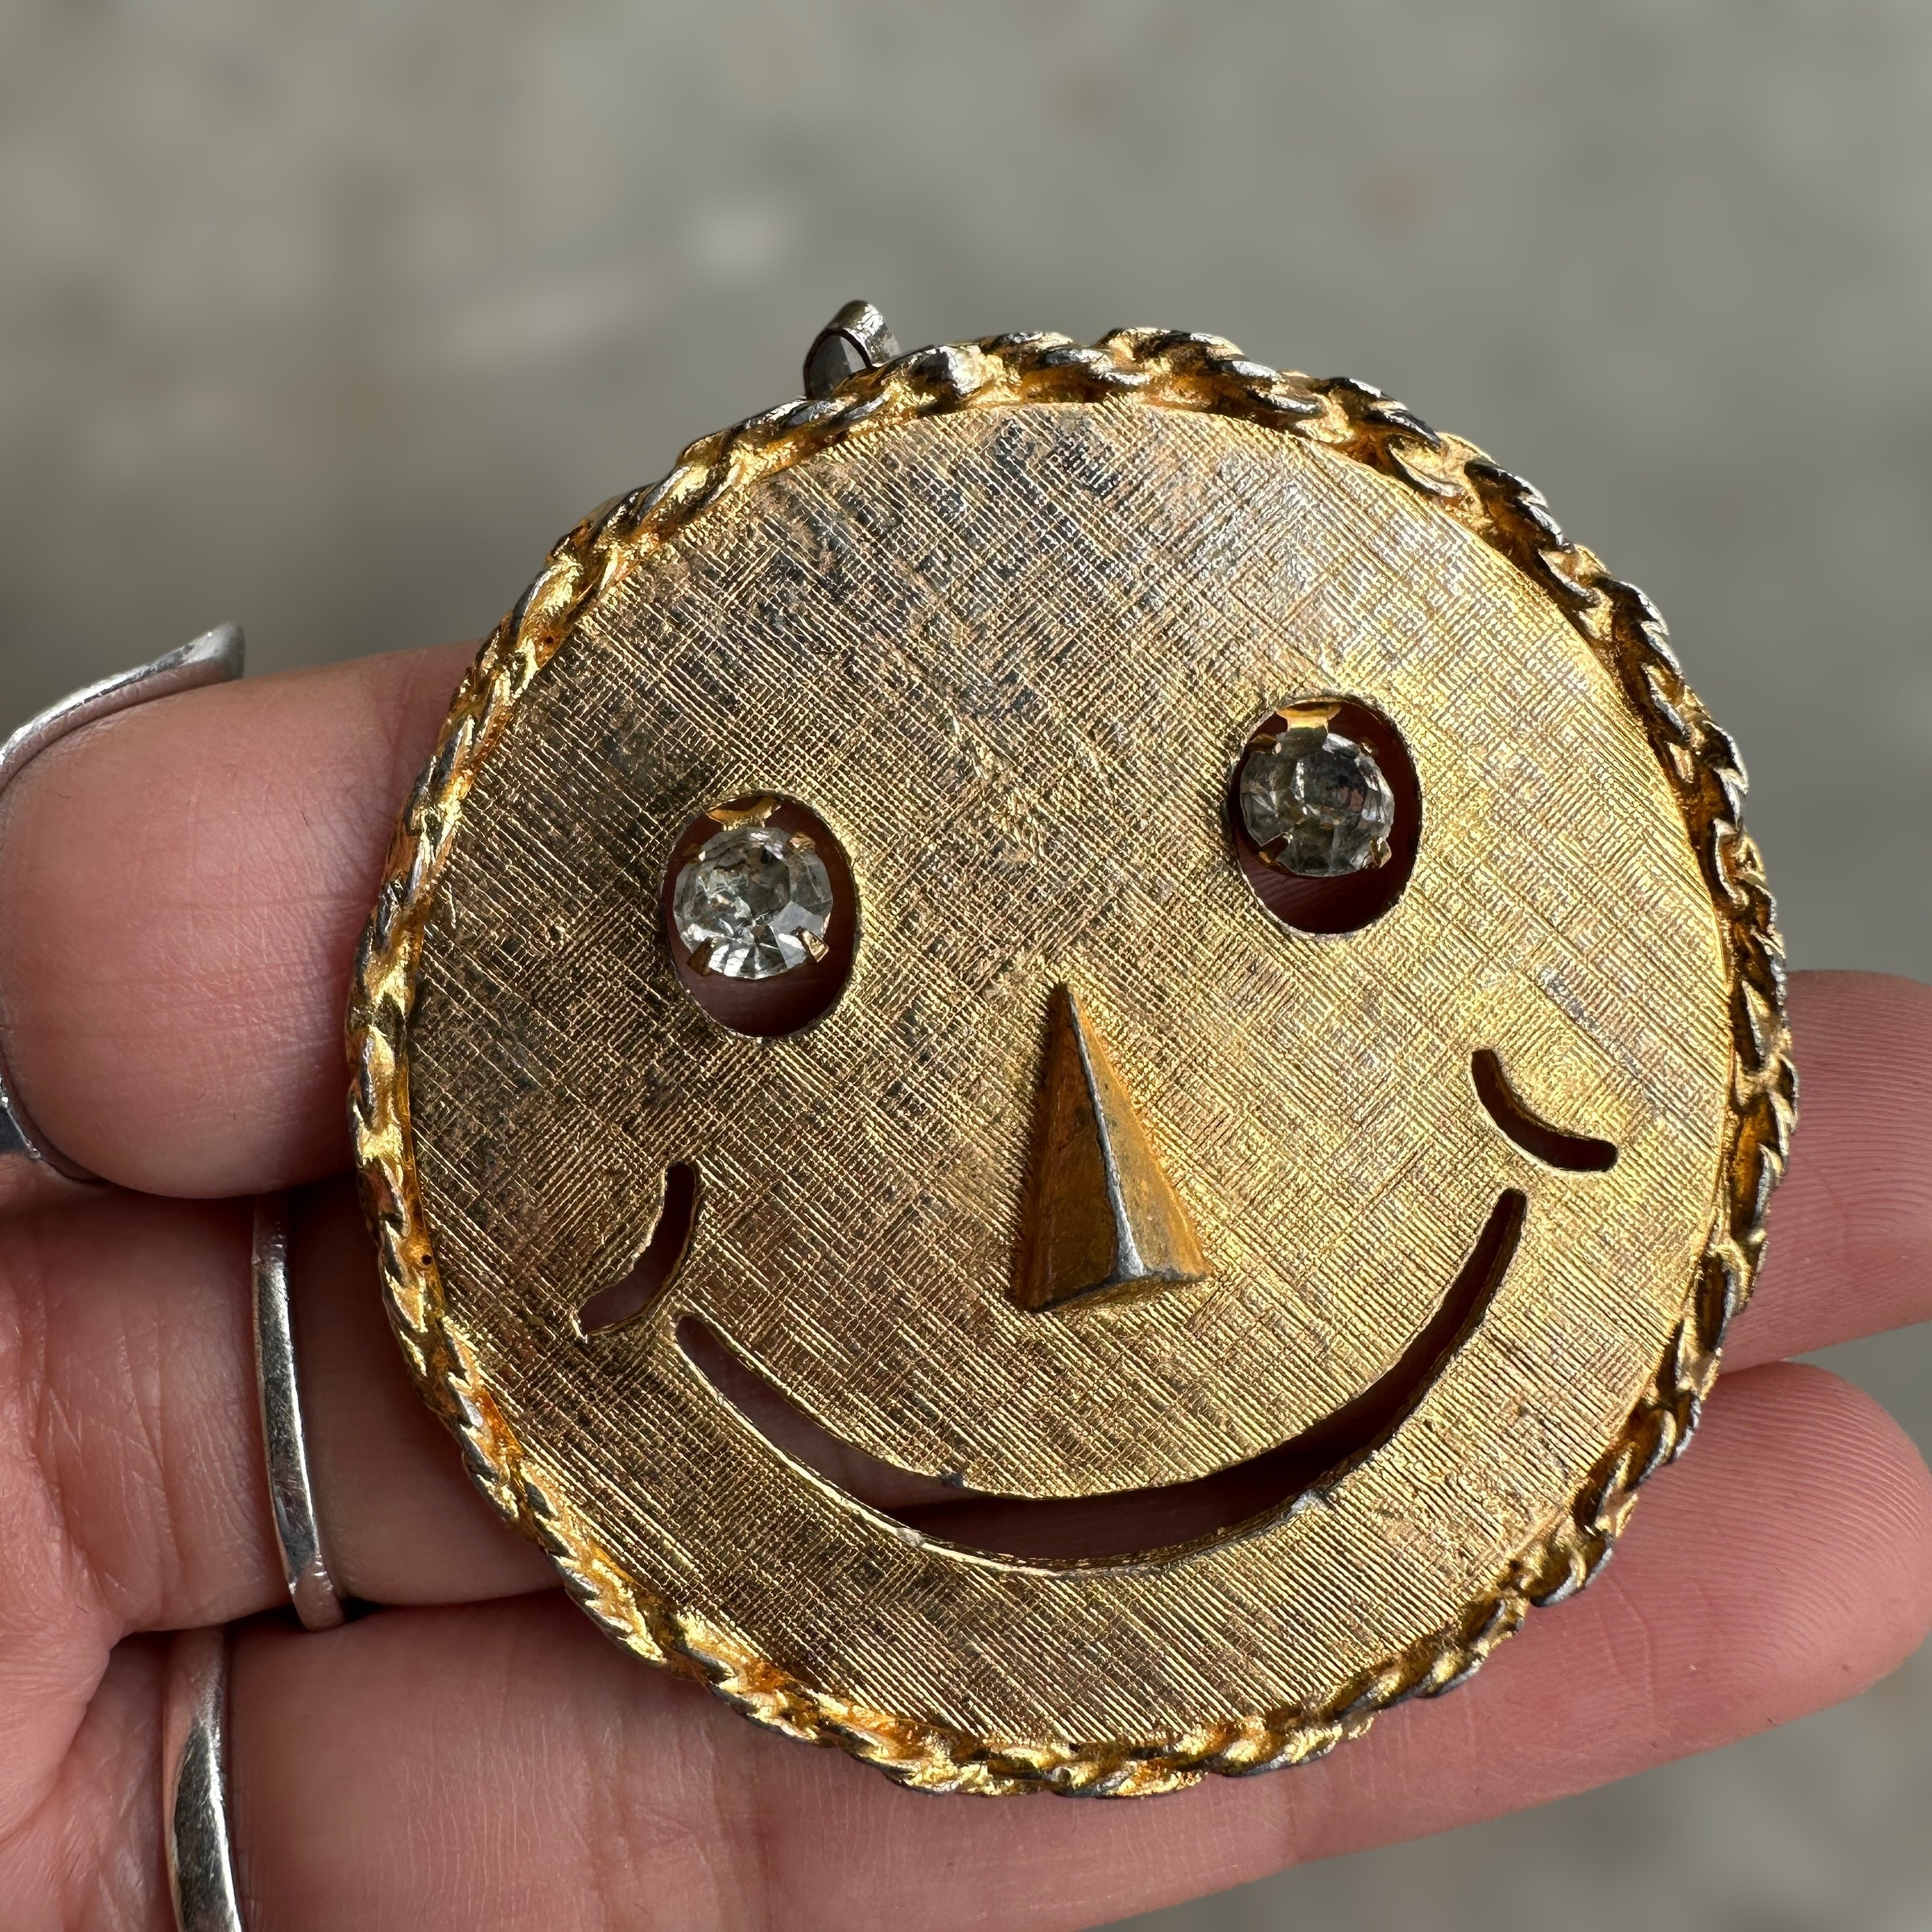 vintage smiley face brooch and pendant with articulated rhinestone eyes